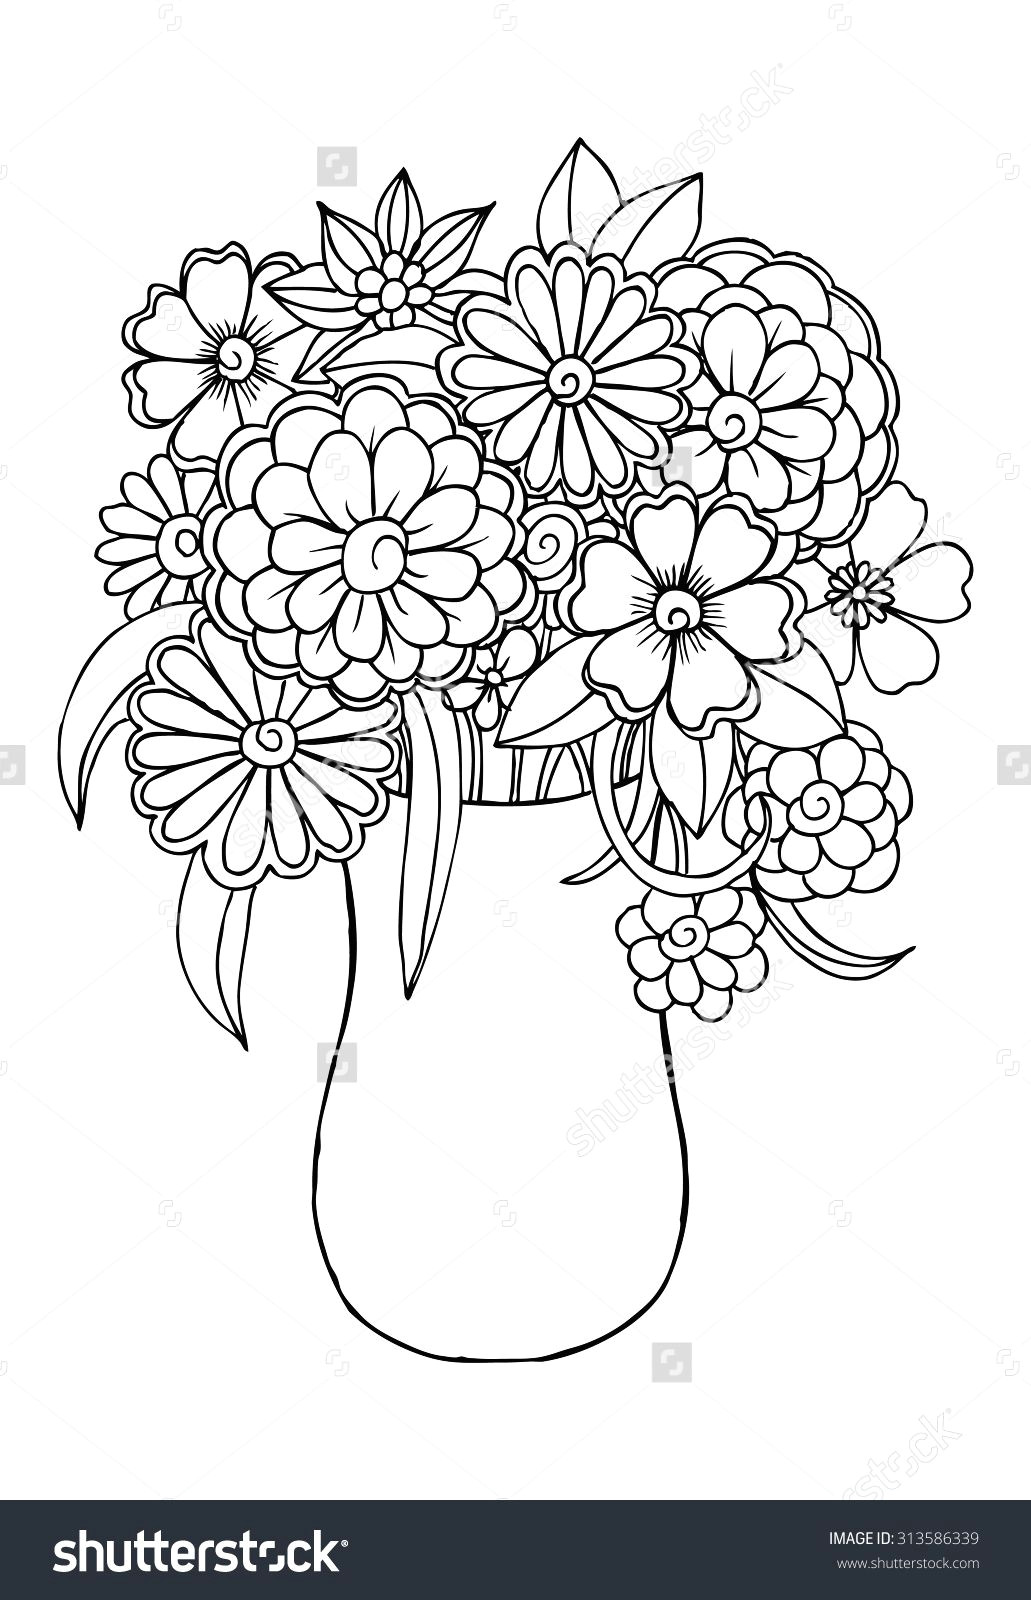 Drawing A Bunch Of Flowers Vector Bouquet Of Flowers In A Vase Art Draw Flowers and Plants